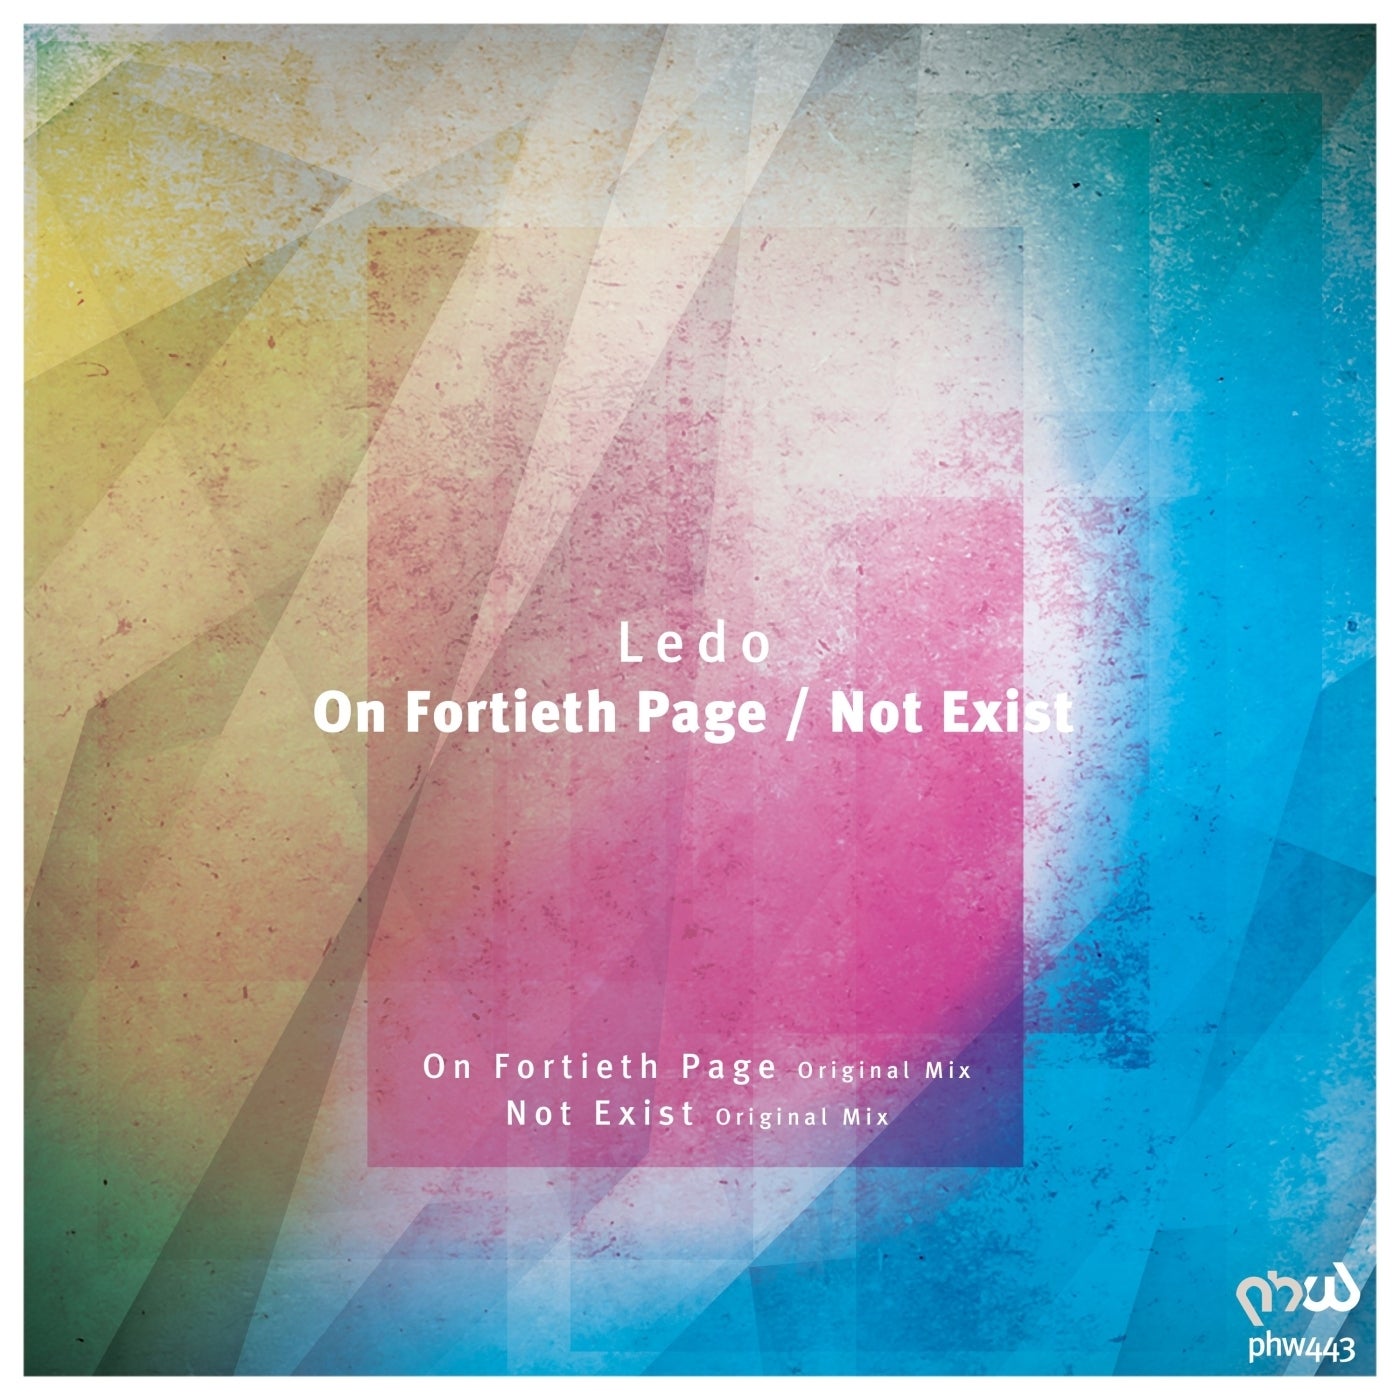 On Fortieth Page / Not Exist